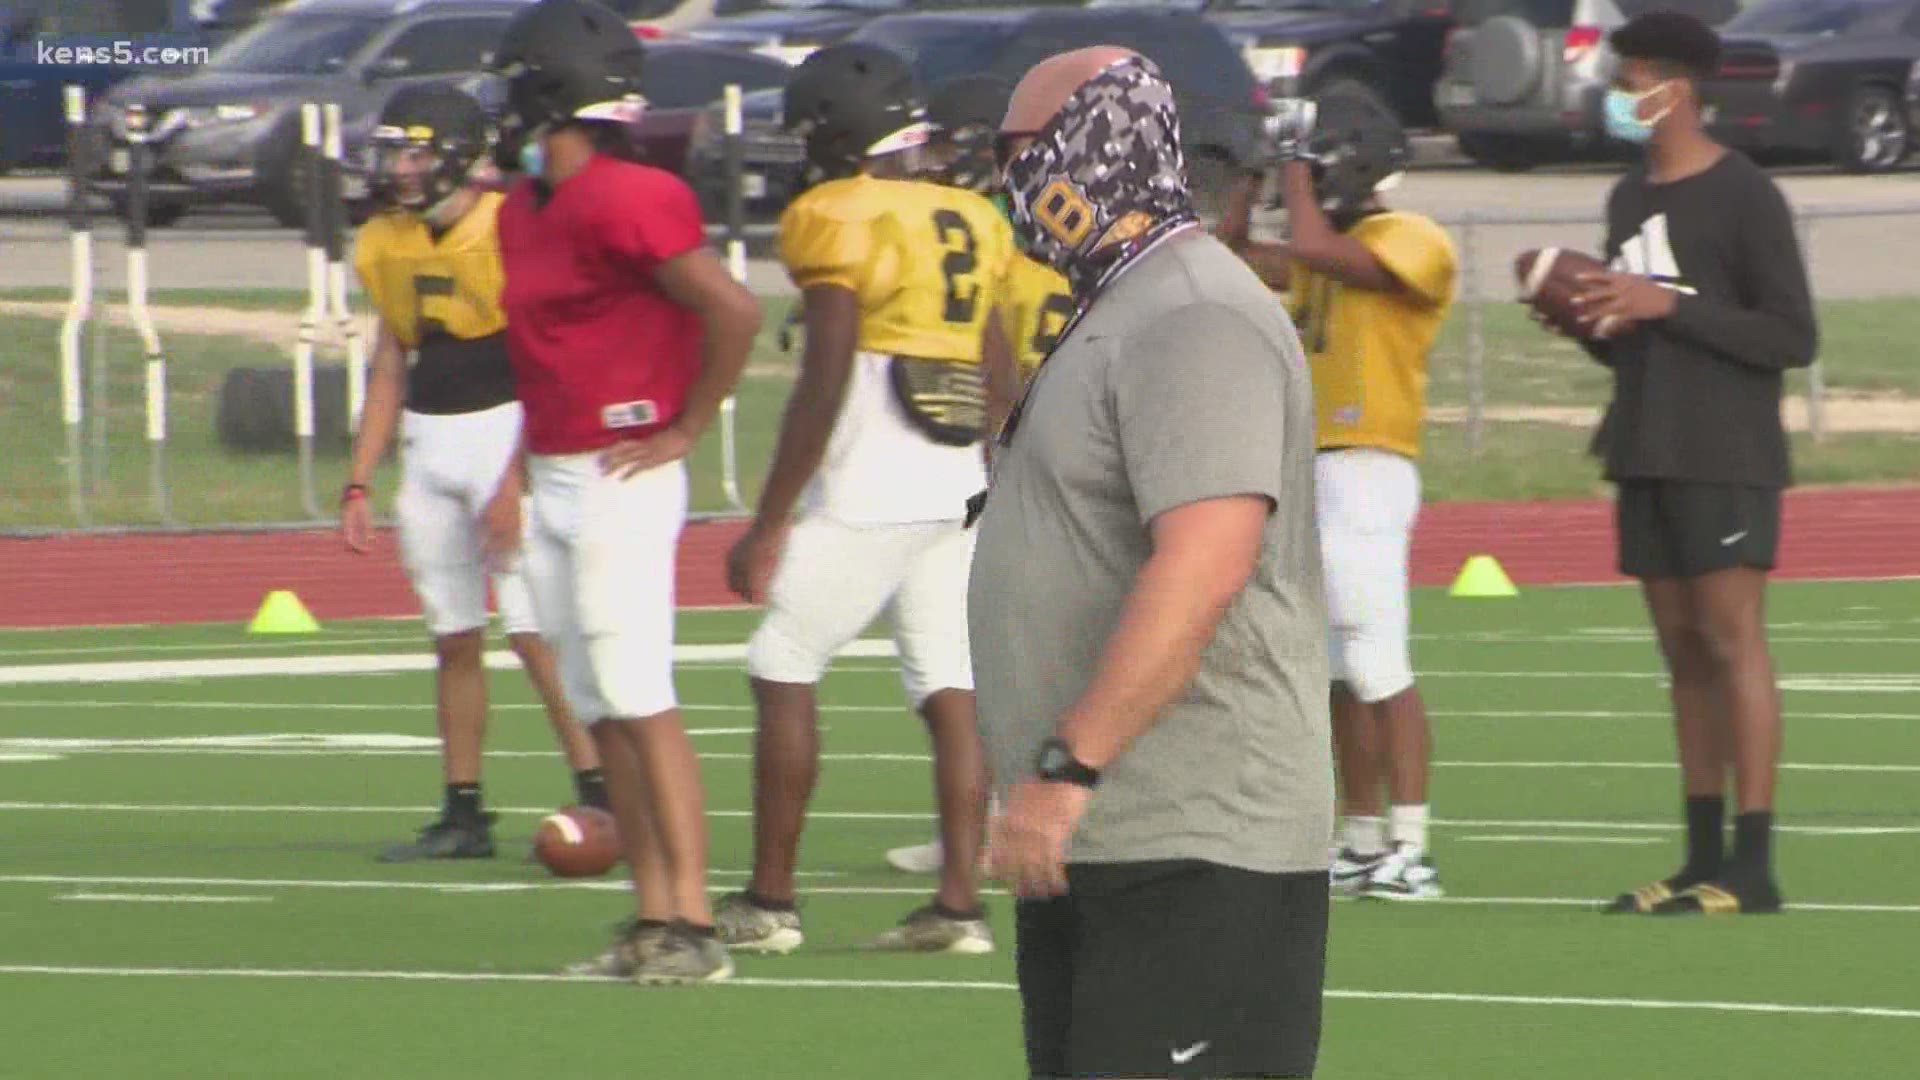 After a 9-3 record last year, Brennan is in the hunt for a district title. Sophomore quarterback Ashton Dubose is talented, and his team has speed all over.